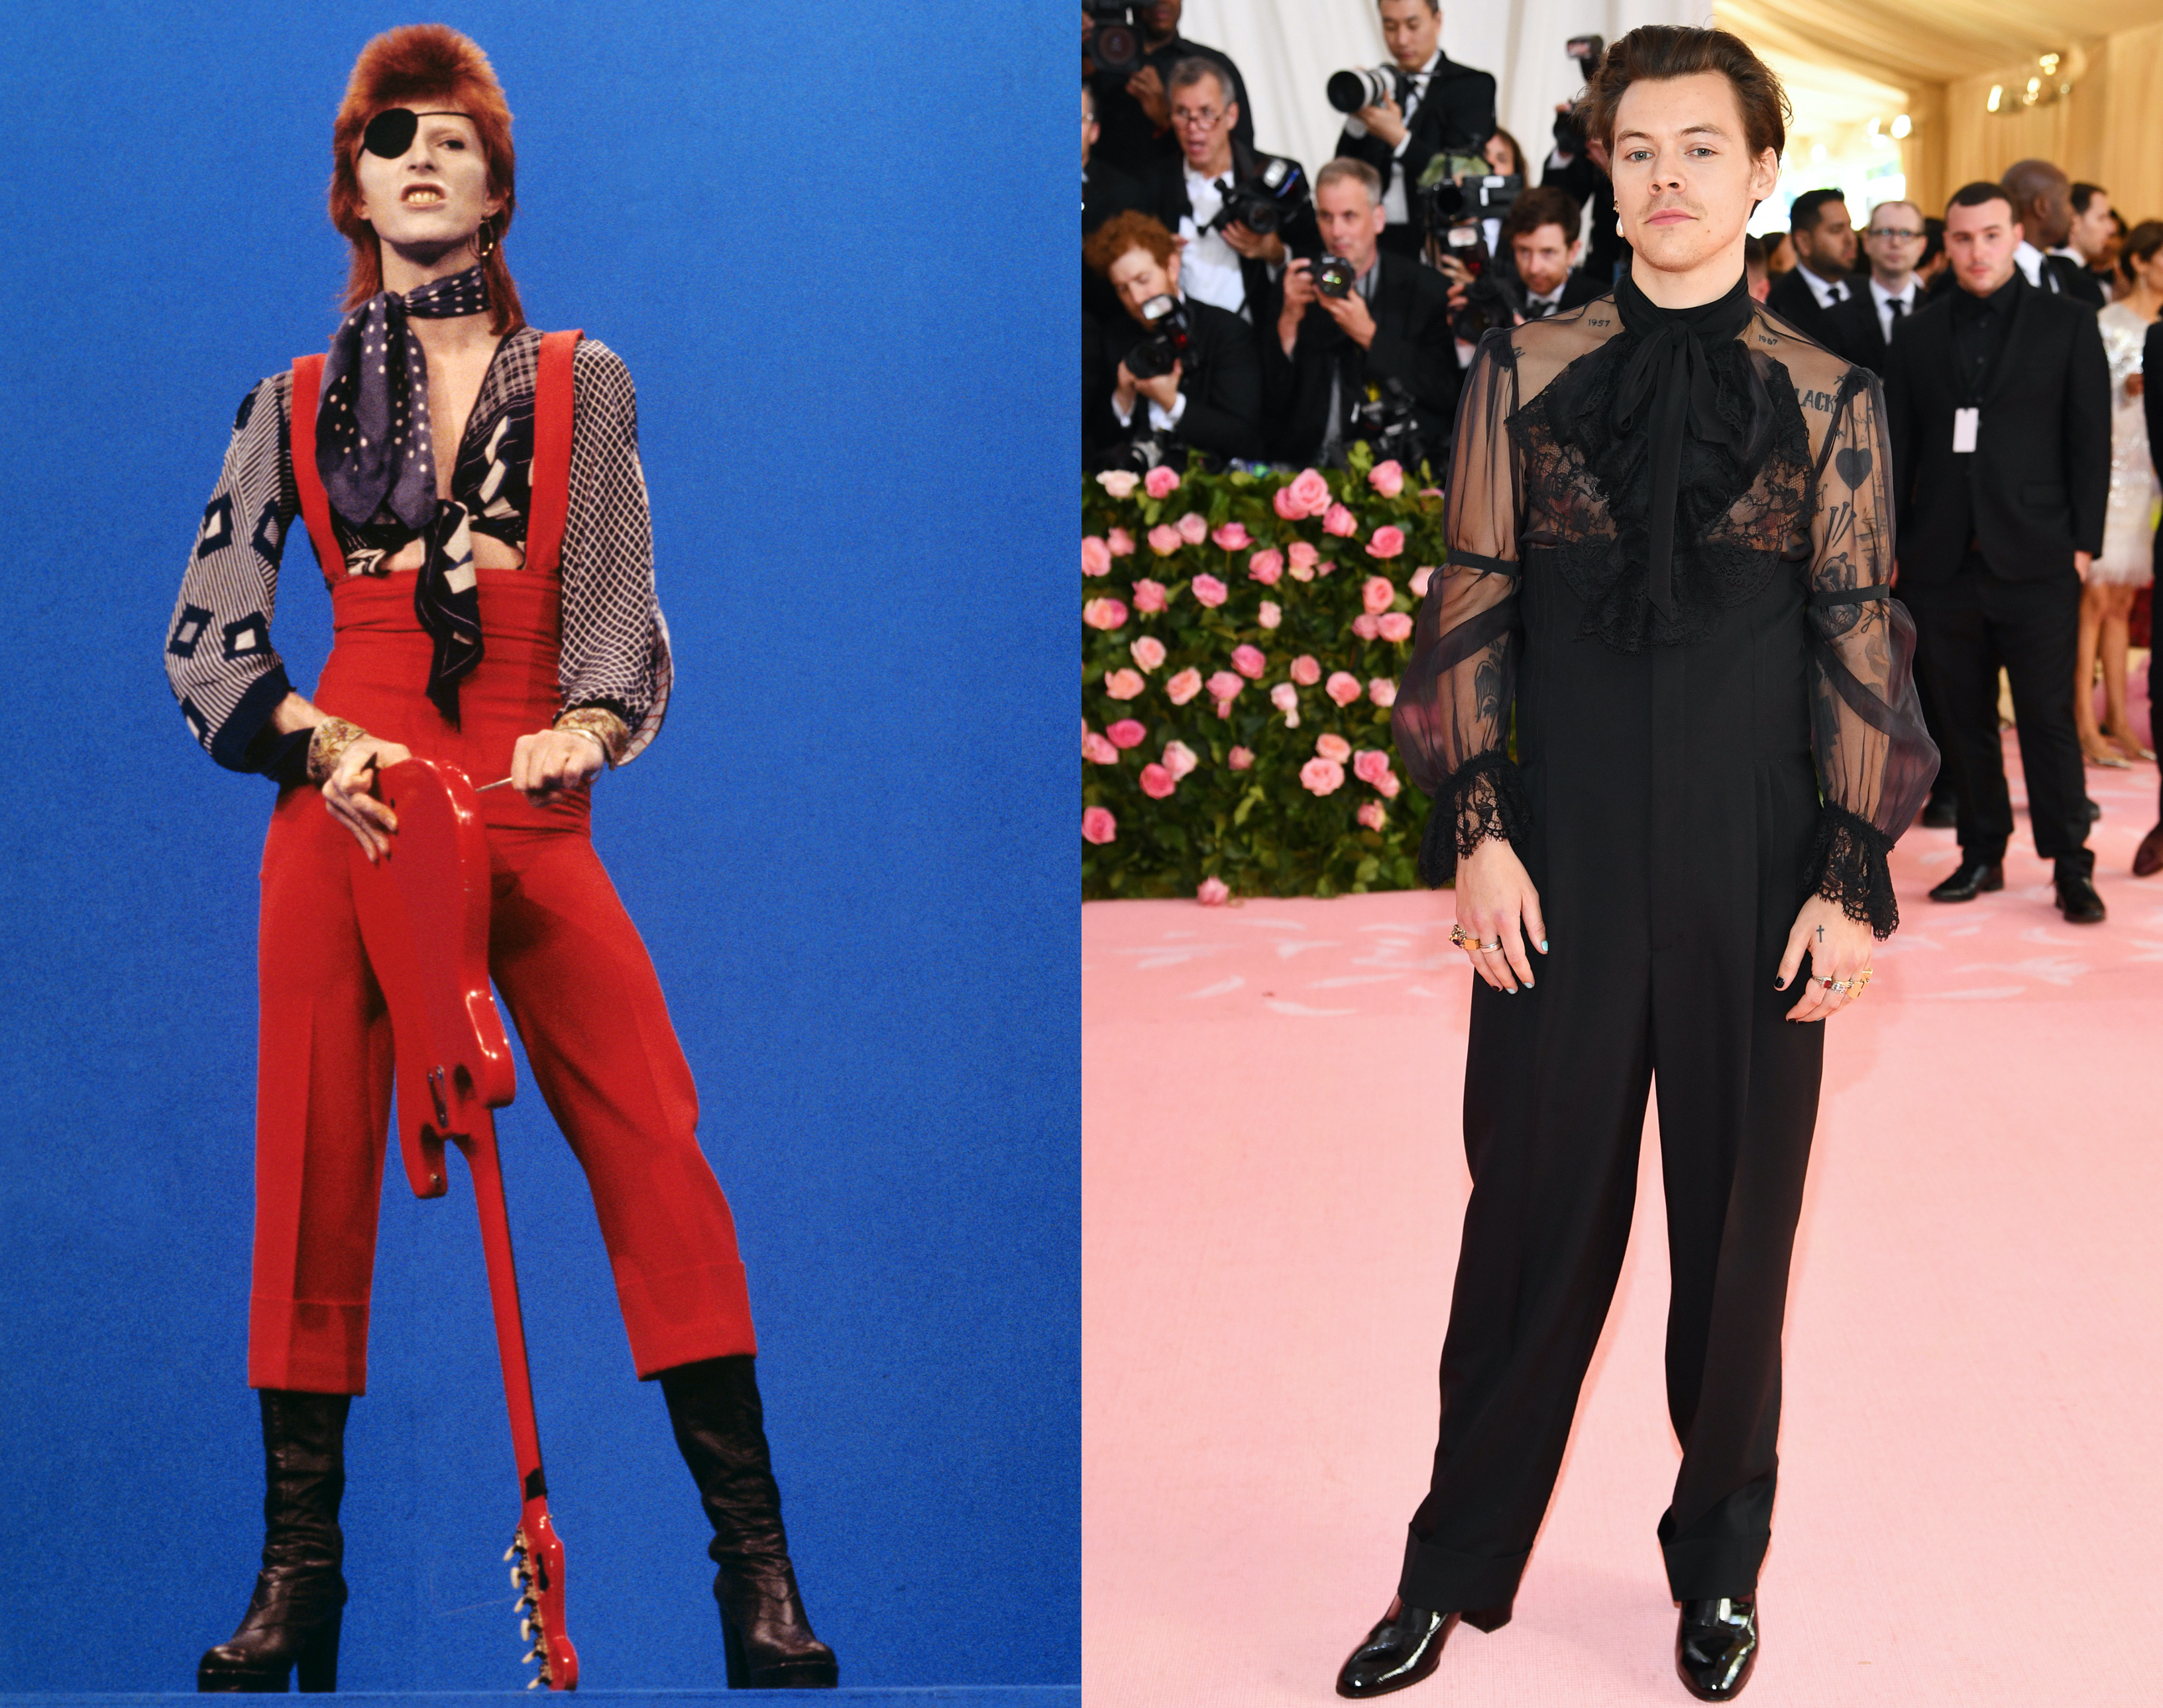 Harry Styles (R) regularly cites David Bowie as a style icon of his. (Gijsbert Hanekroot/Redferns via Getty/ANGELA WEISS/AFP via Getty Images)